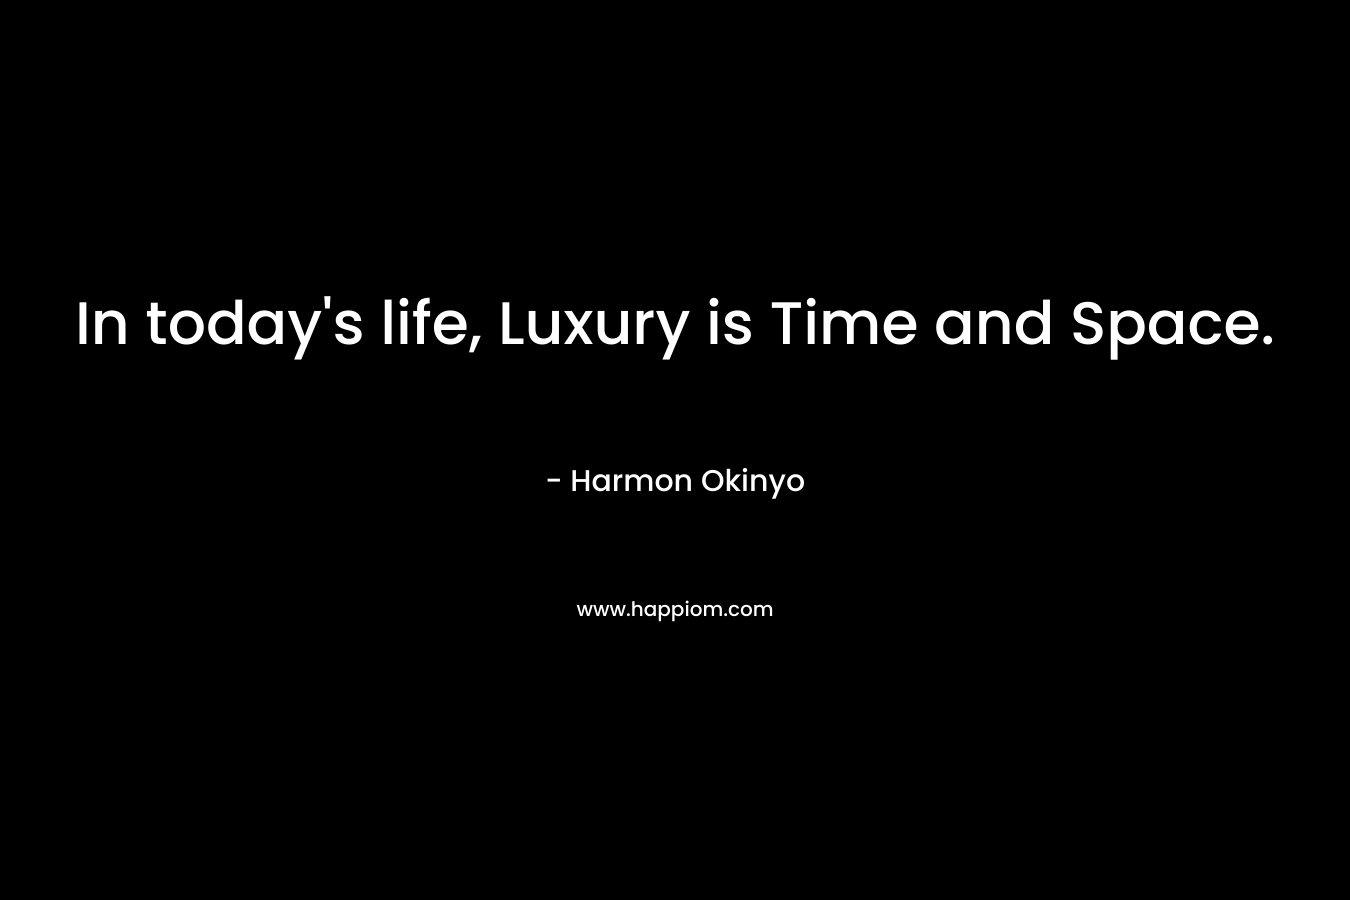 In today’s life, Luxury is Time and Space. – Harmon Okinyo